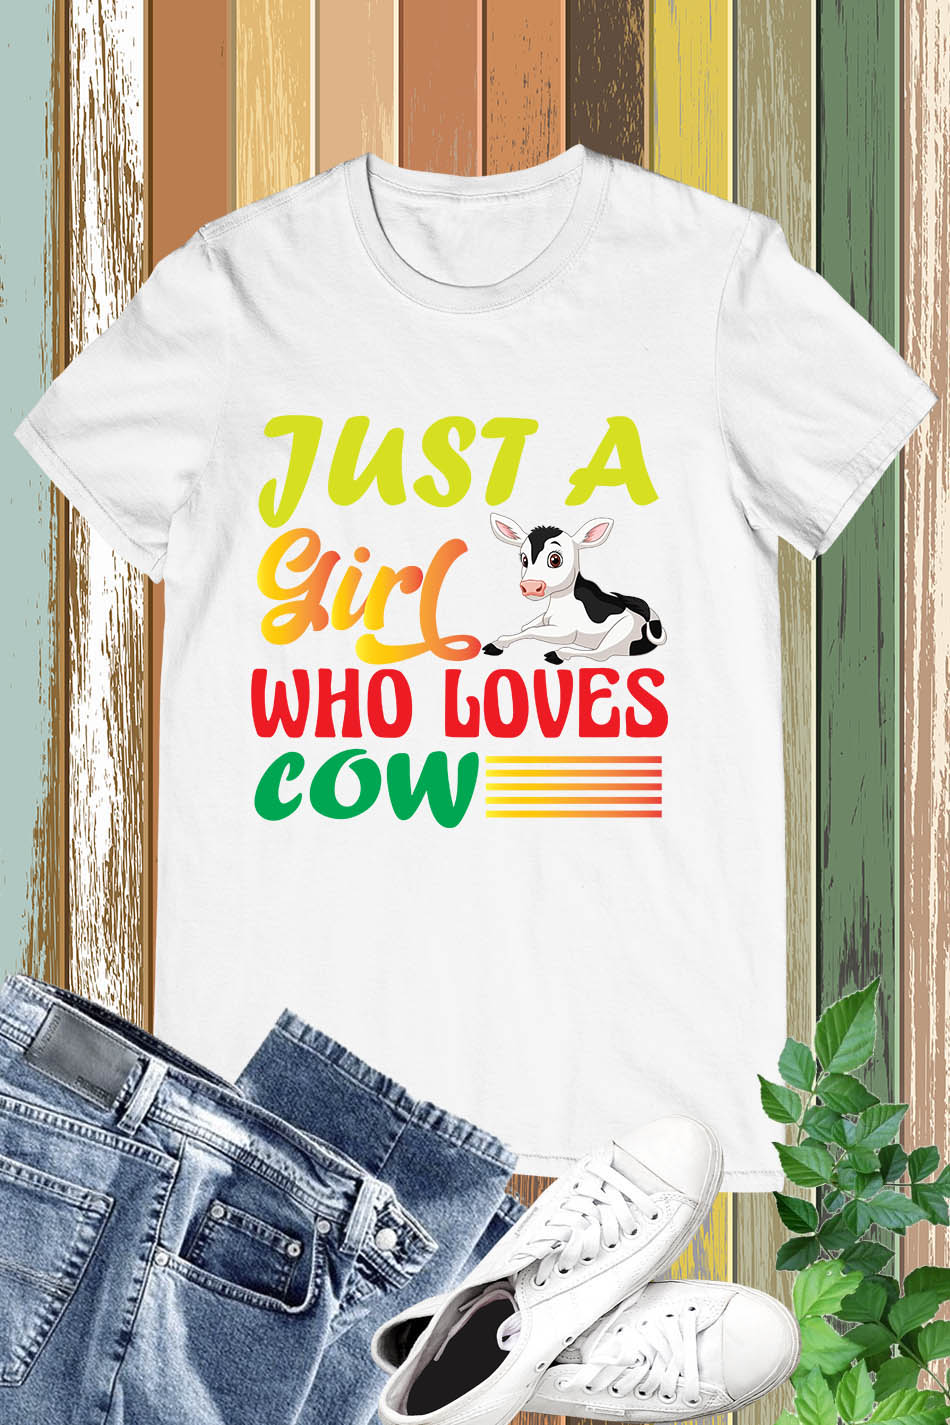 Just a Girl Who Loves Cow T-Shirt